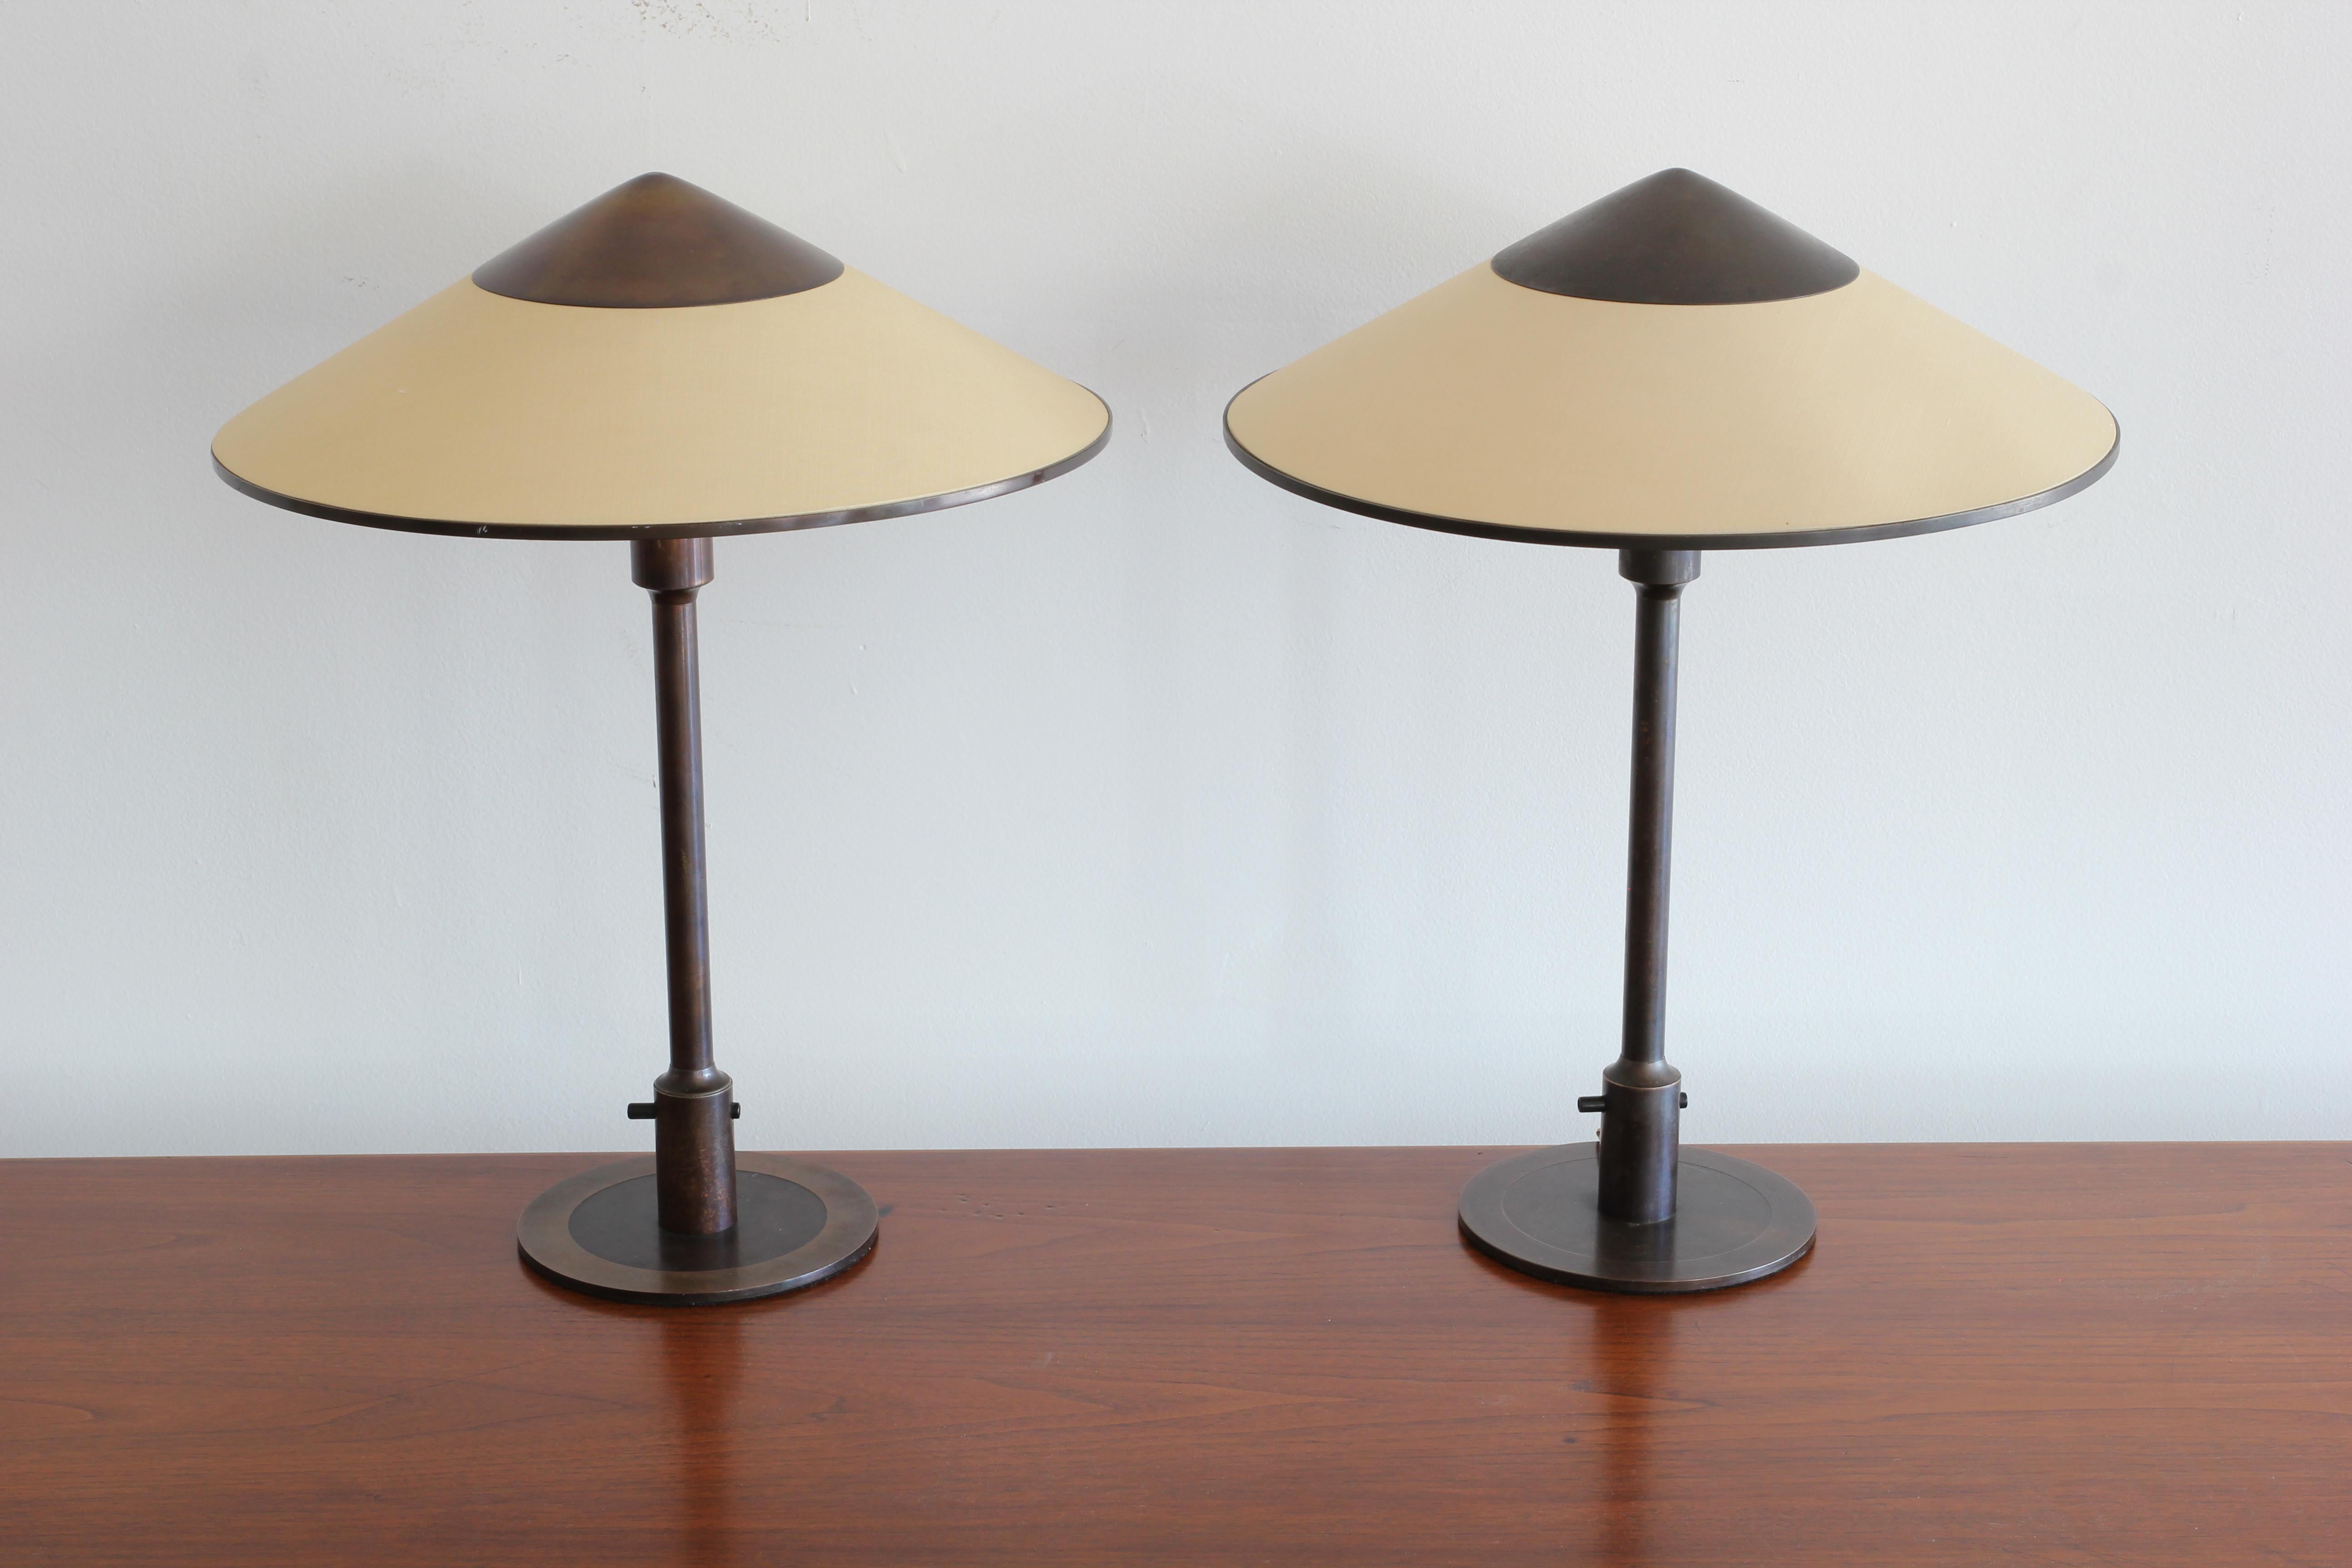 Incredible burnished bronze table lamp with cone shade called the Kongelys Lamp by Niels Rasmussen Thykier for Fog & Mørup. Original metal fittings on shades. 

Slight variations in each. Could be sold individually.